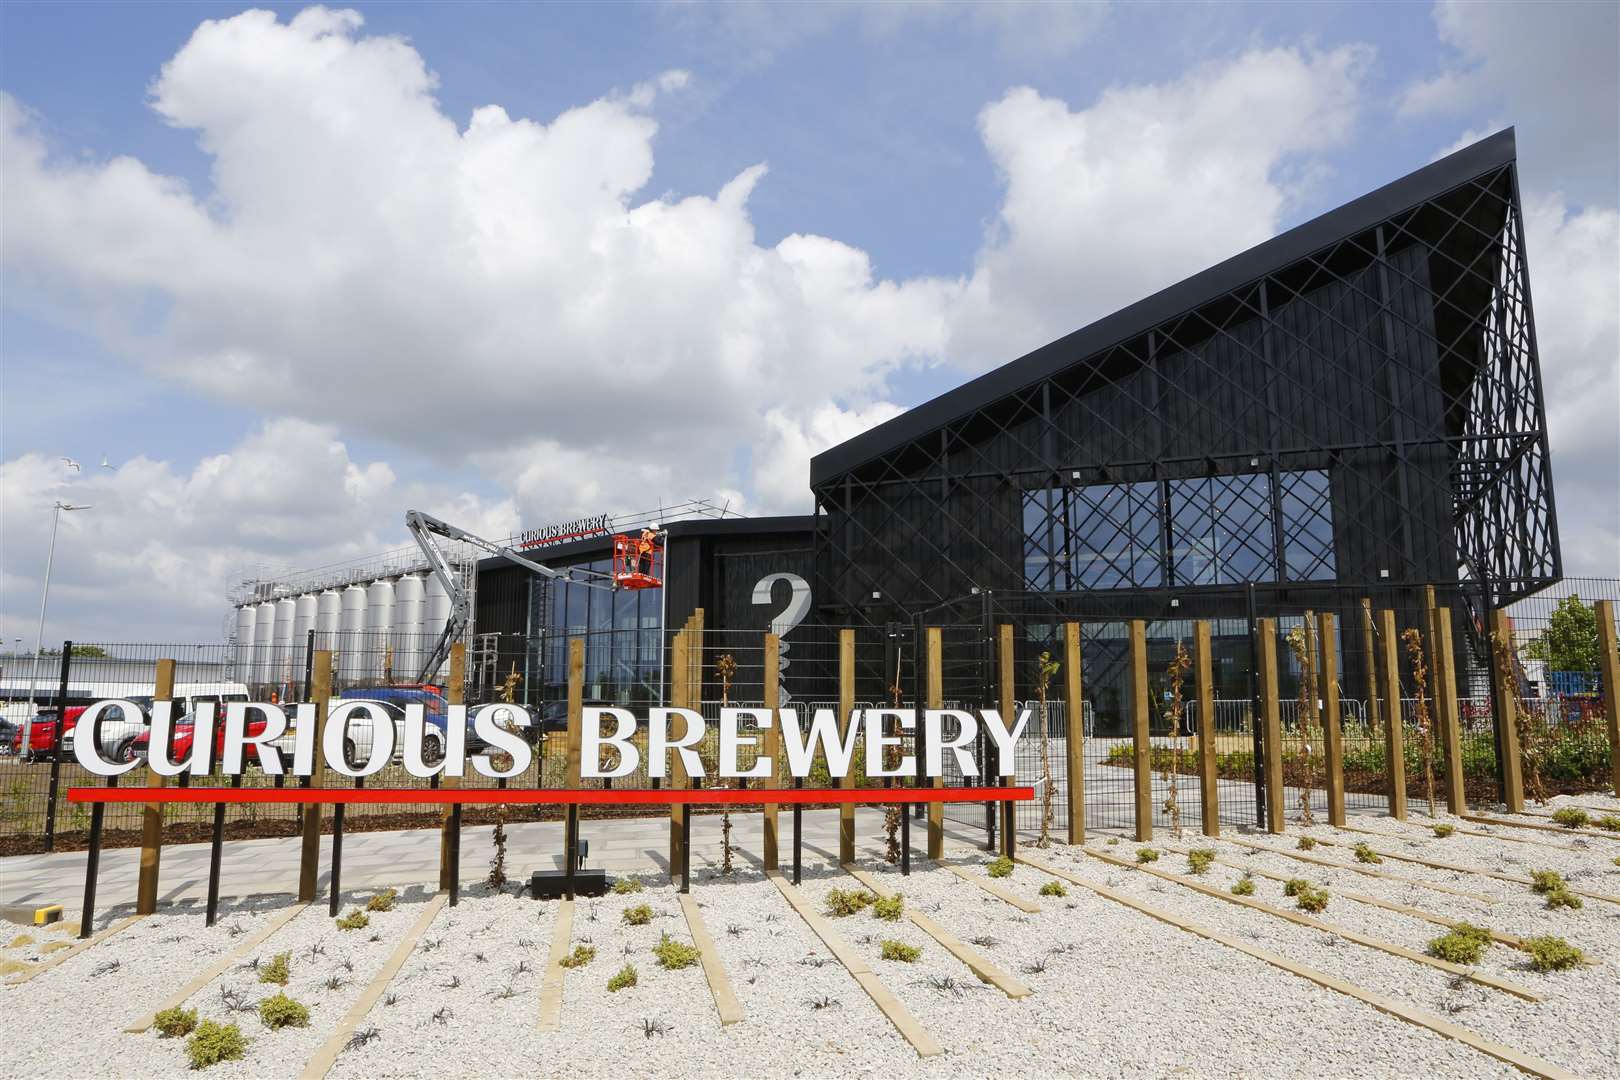 The new Curious brewery in Ashford Picture: Andy Jones